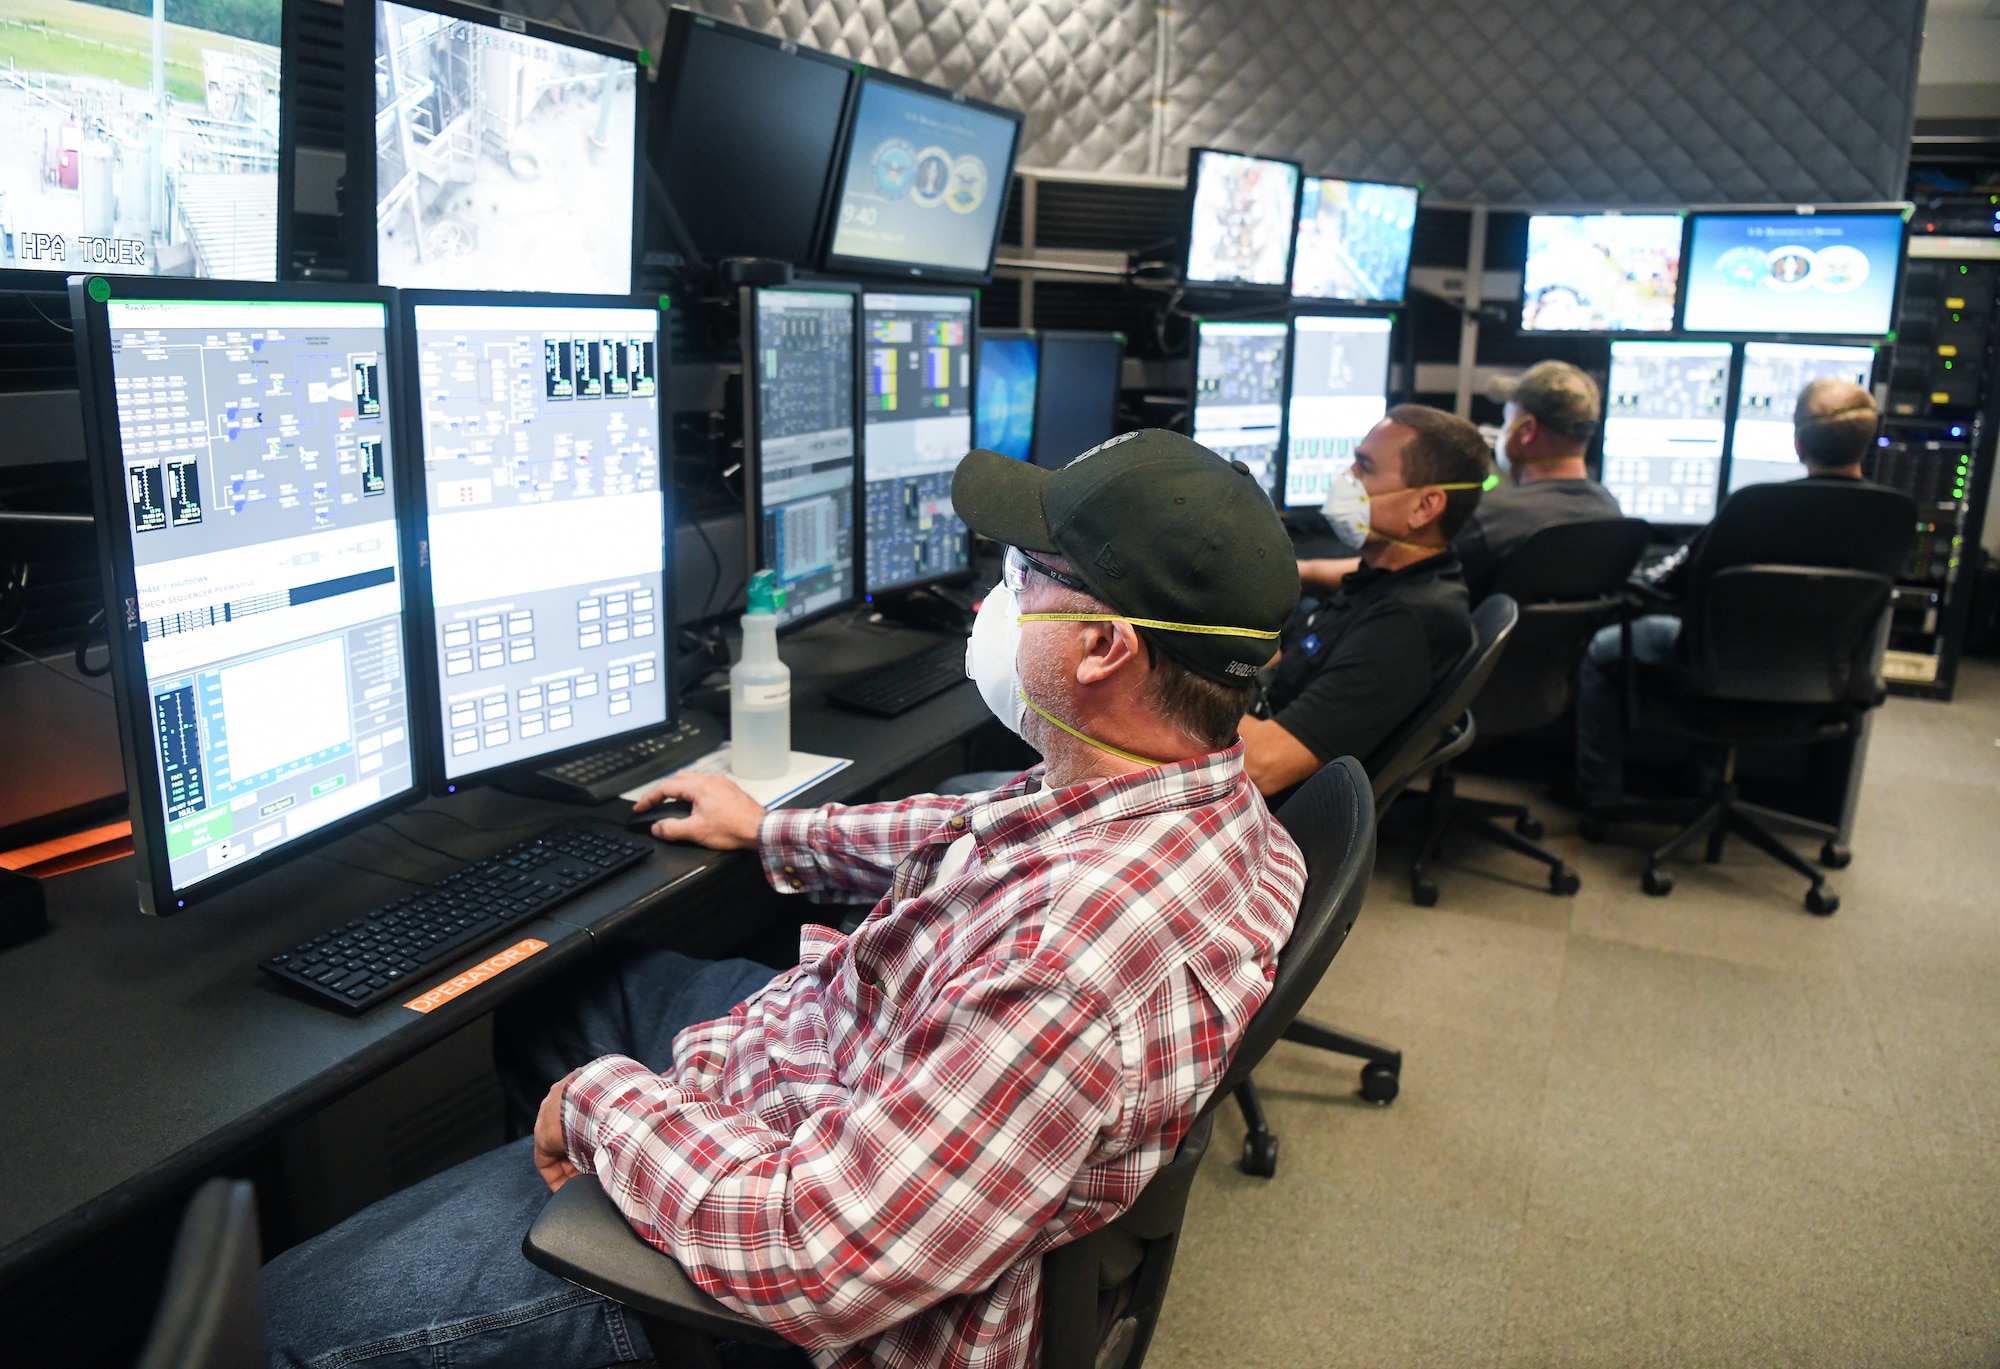 John VanScoten, left, an outside machinist, Daryl Osteen, a test operations engineer, and other Team AEDC personnel work in the control room of the Arnold Engineering Development Complex Aerodynamic and Propulsion Test Unit (APTU), May 20, 2020, while wearing masks to help mitigate risk associated with the coronavirus pandemic. The APTU team has performed their tasks, providing hypersonic testing capabilities, without interruption during the pandemic. Hypersonics is considered a critical field for national defense. (U.S. Air Force photo by Jill Pickett)